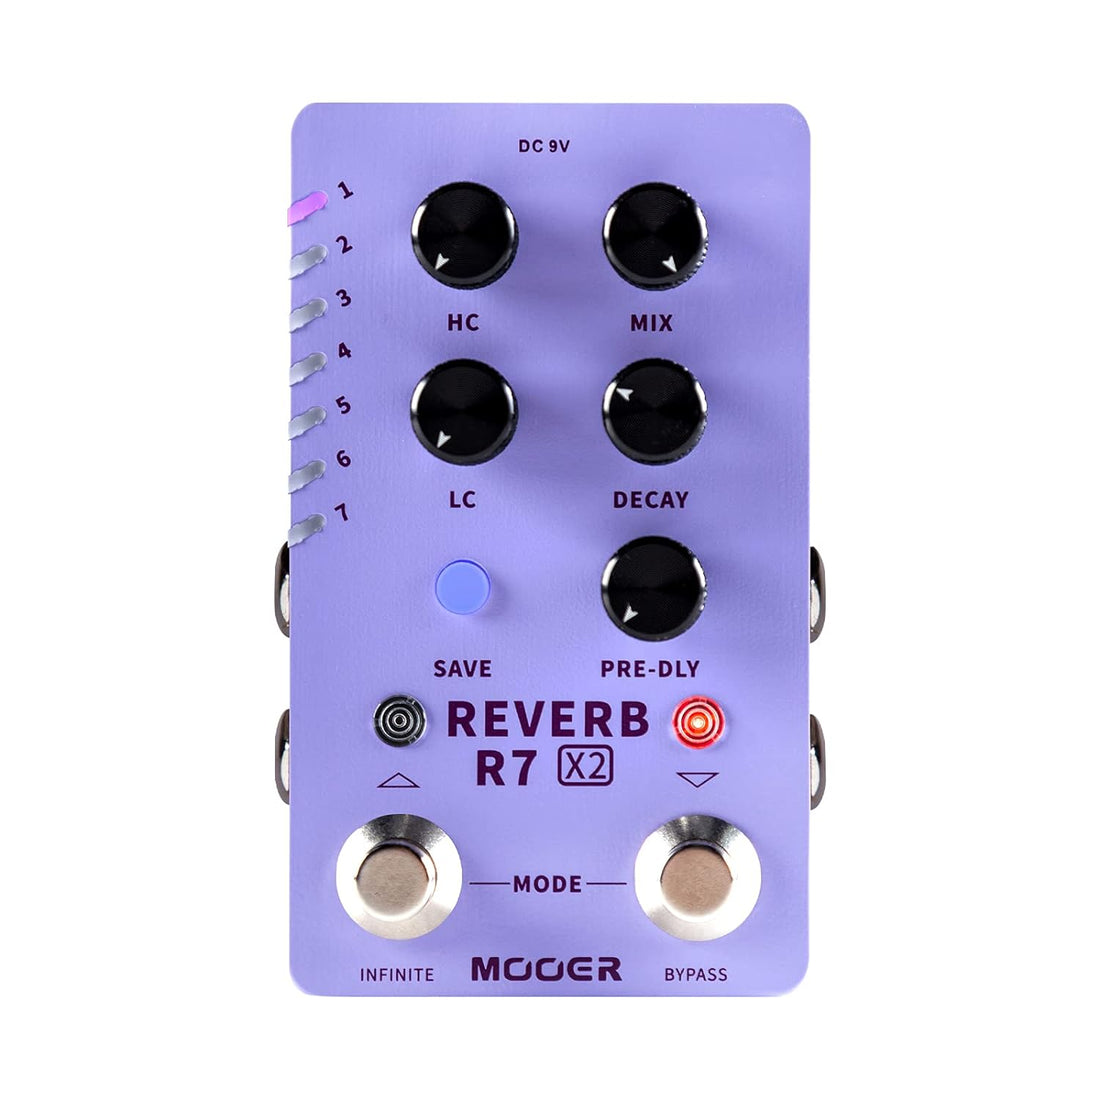 MOOER R7 X2 Stereo Multi Reverb Pedal from Classic Reverb to Modern Ambient, 14 different Reverb types with High Cut, Low Cut, Mix Parameter Knobs and Infinite and Trail-on functions